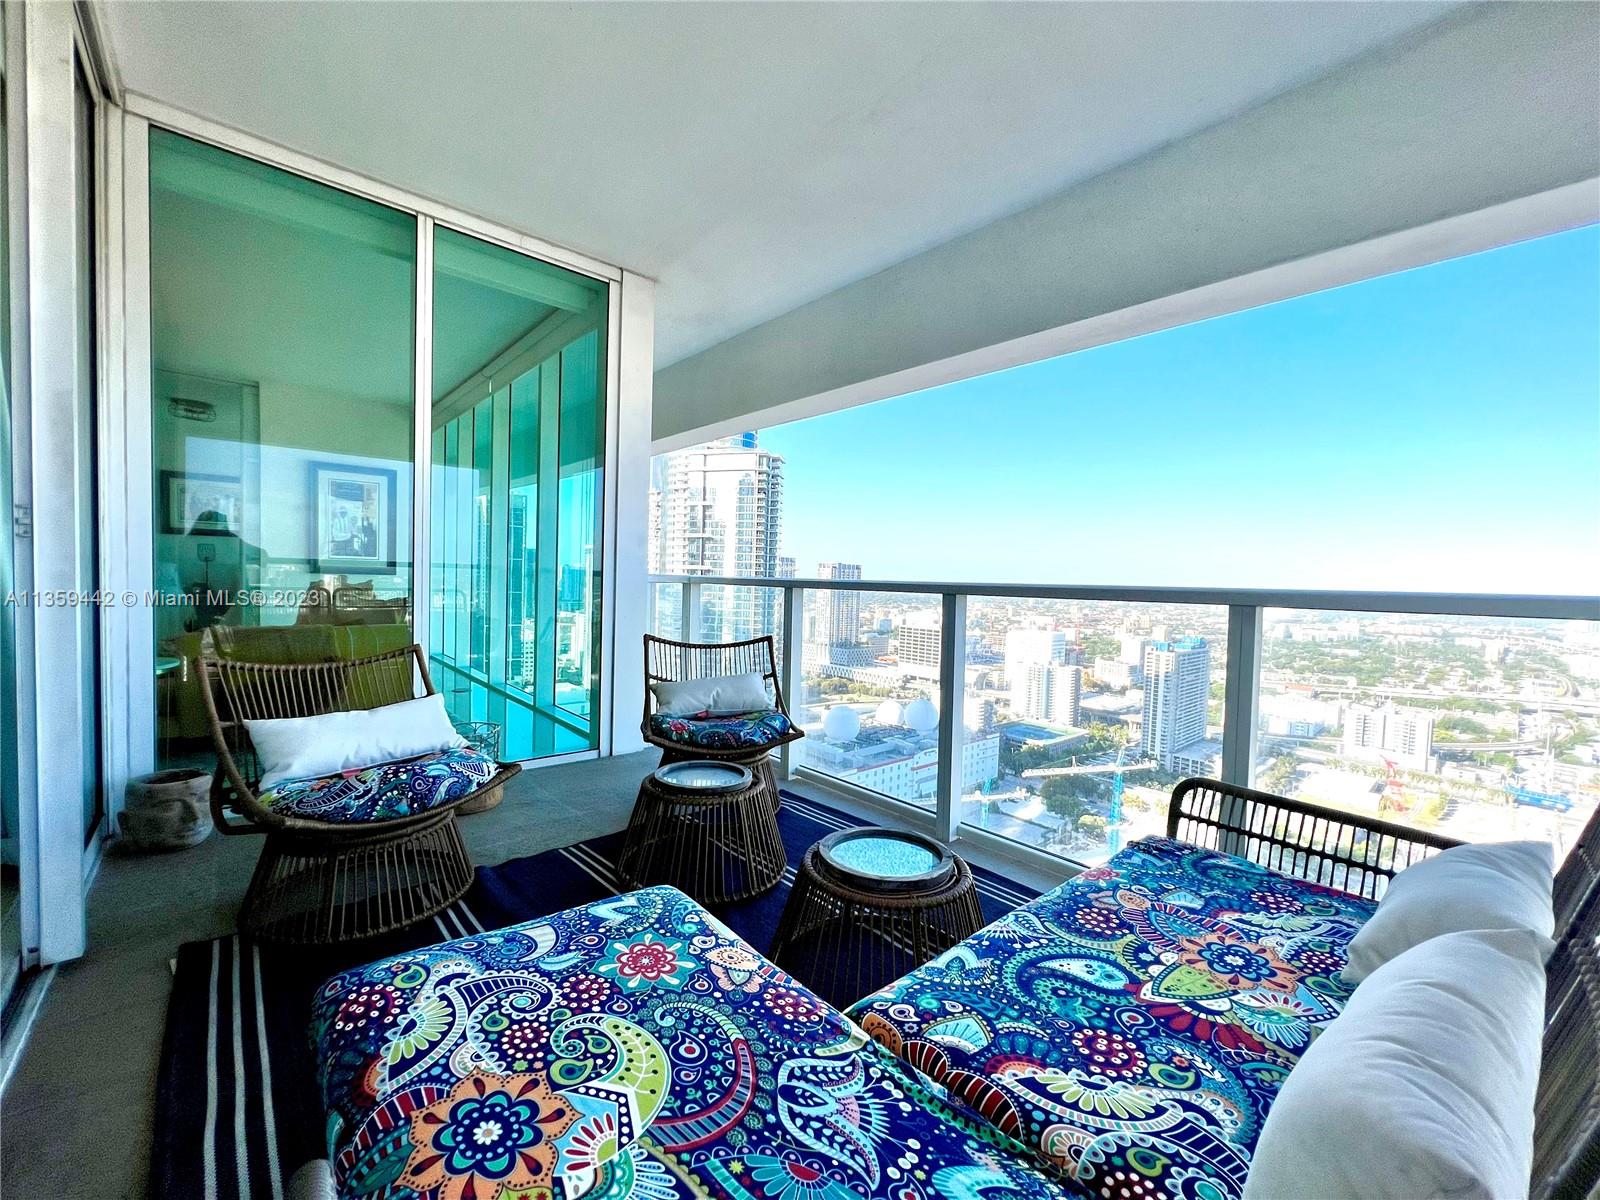 Amazing spacious 2 bedroom 2 bath located at one of the most sought after buildings in Downtown Miami. Ten Museum Park designed by Chad Oppenheim of Oppenheim Architecture winner of over 45 AIA Awards and winner of the National Design award by Smithsonian design Museum is a boutique luxury skyscraper condo situated in northeastern Downtown on Biscayne Bay. It is Across Miami Perez's Art Museum and it's 30 acre water front Park among others, waking distance to the best Art and Sport entertainment of Miami. Easy access to Metro Mover a plus. This apartment will charm you with one look you will feel home. Amenities include Pools, Sauna ,Gym, steam room and spa.
Won't last if location is what you are looking for its a must see. Tenant occupied on month to month bases but a 24h notice will do.